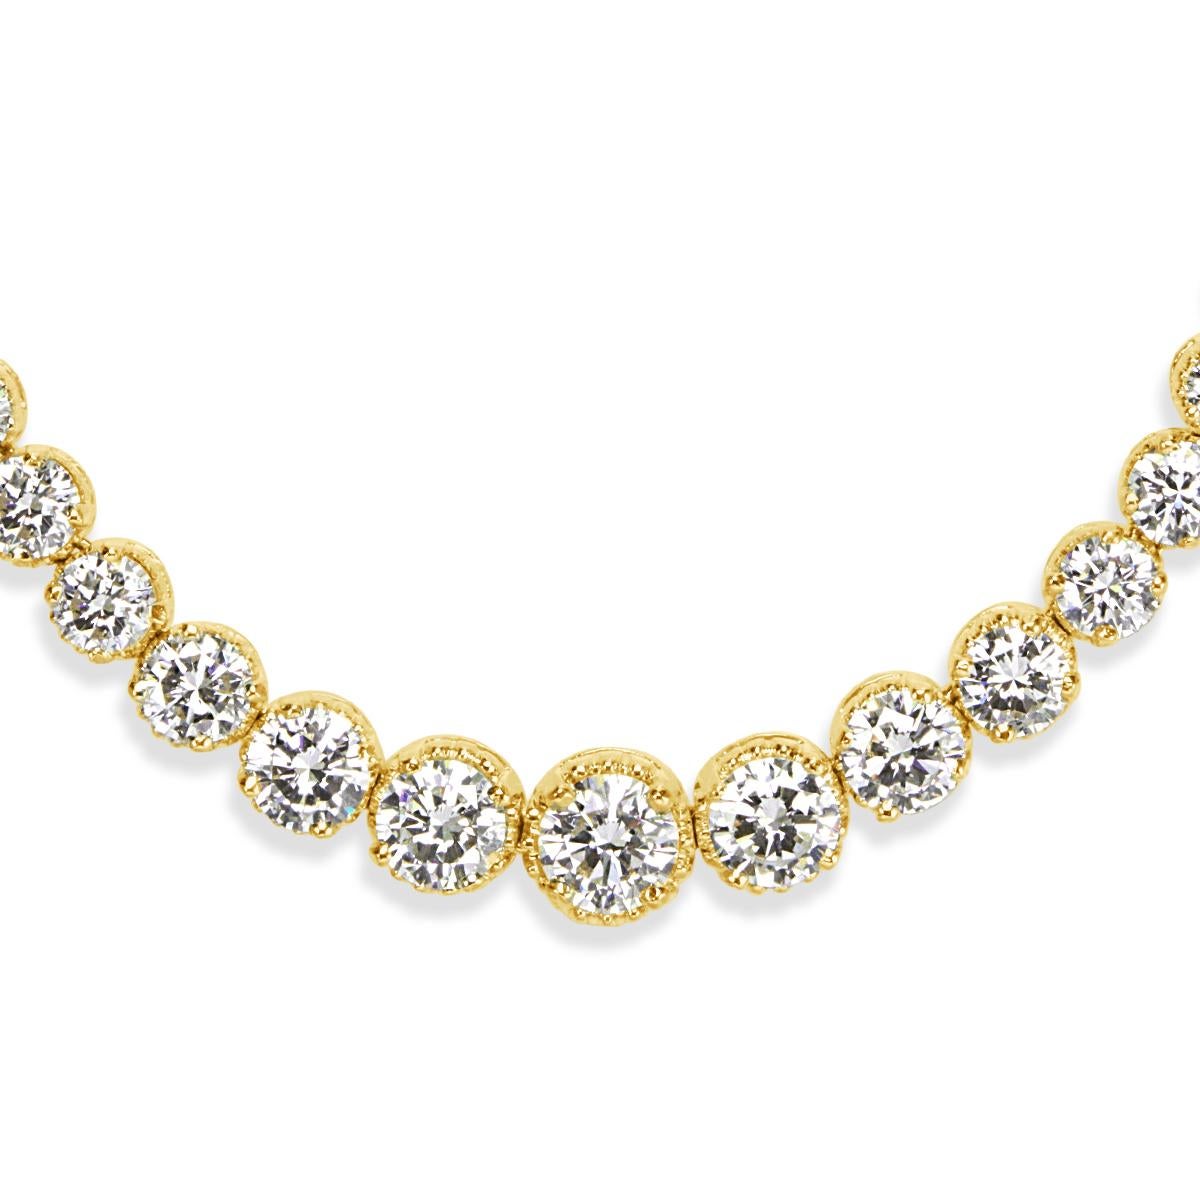 This unique estate diamond necklace features 18.10ct of round brilliant cut diamonds that cascade down the neckline in an elegant 14k yellow gold, riviera setting style. The diamonds are graded at F-G in color, VS1-VS2 in clarity.
